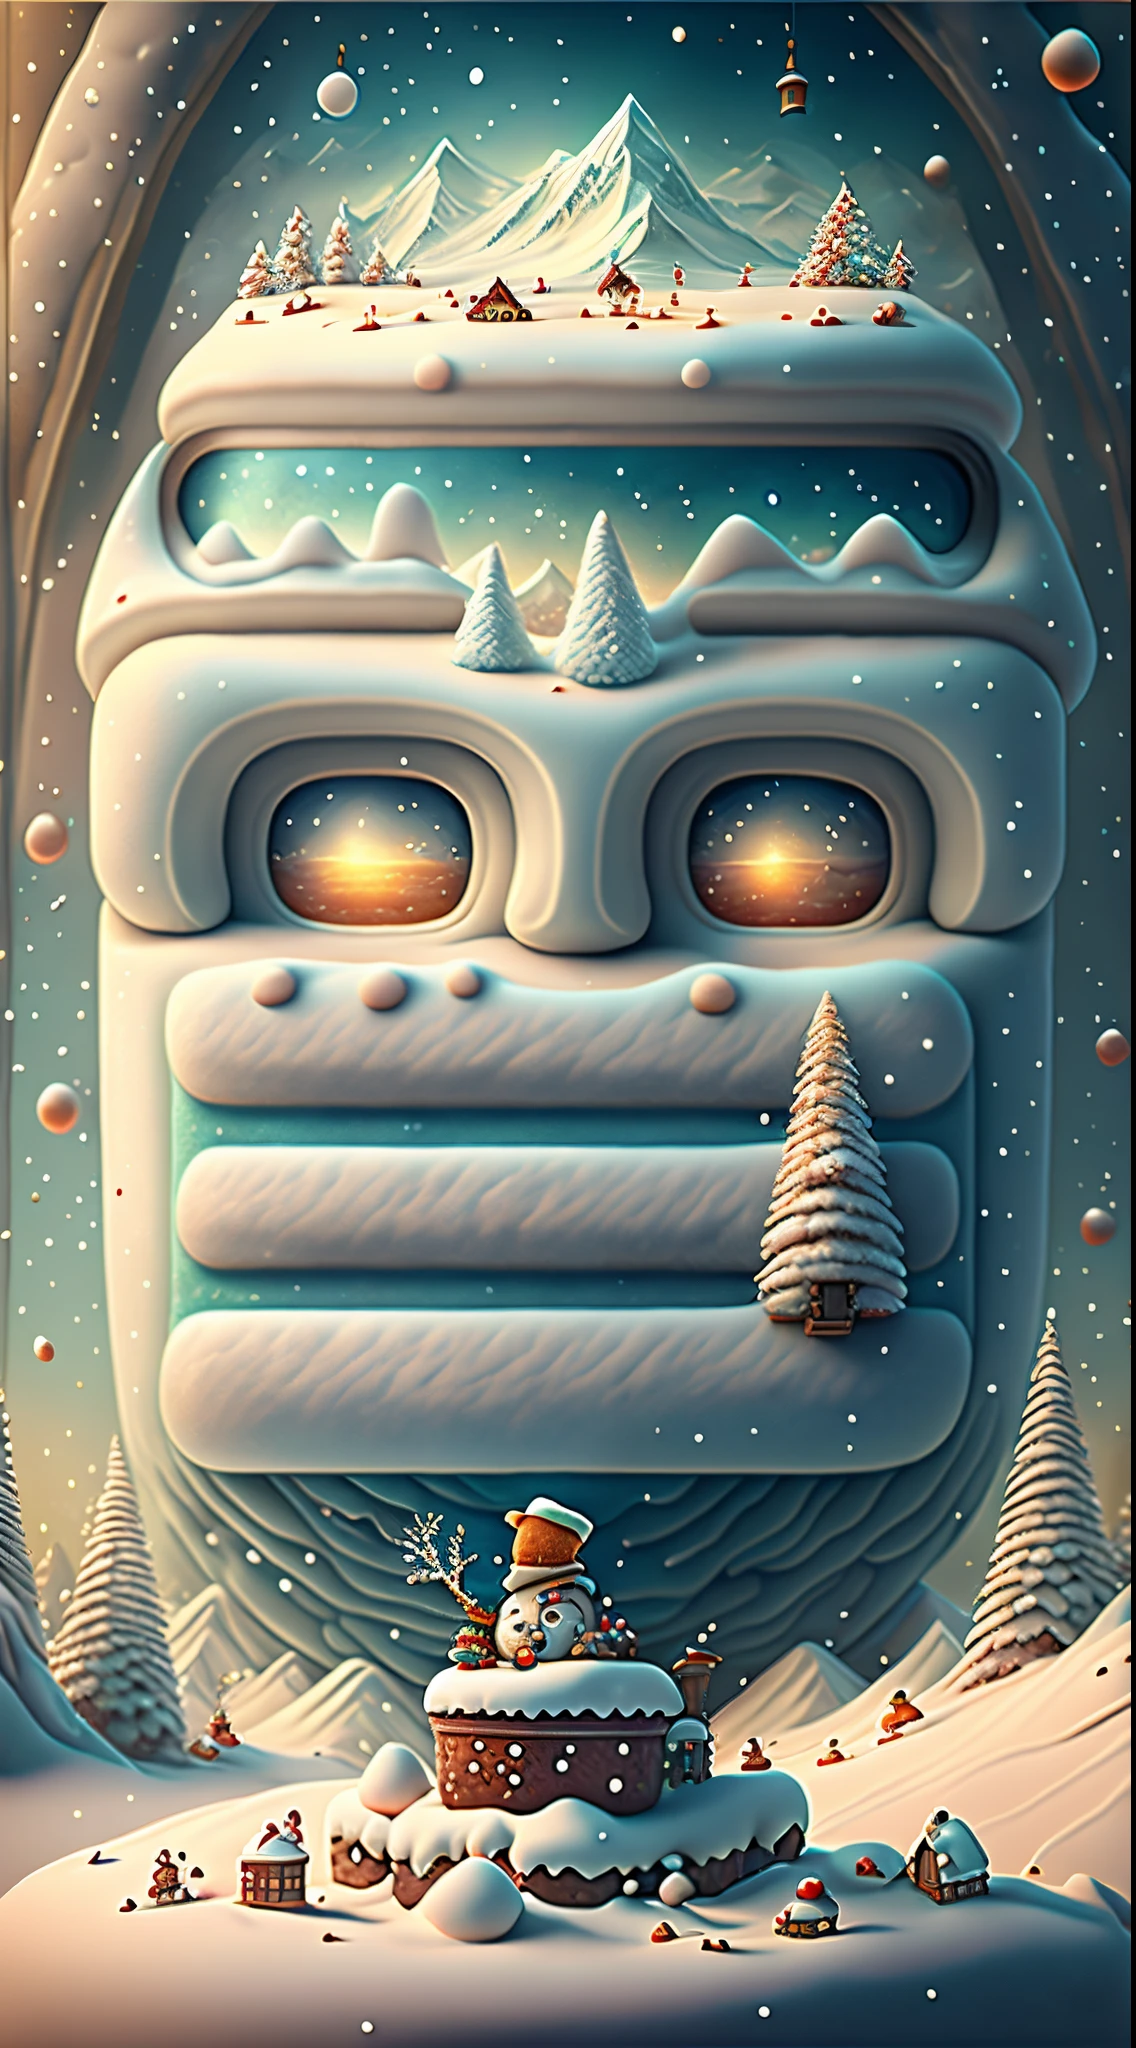 （Creative holiday poster design），（Huge snowy mountains），（Cute Snowman：0.8），pixar-style，Fantasyart，Surreal，,the ultra-detailed,